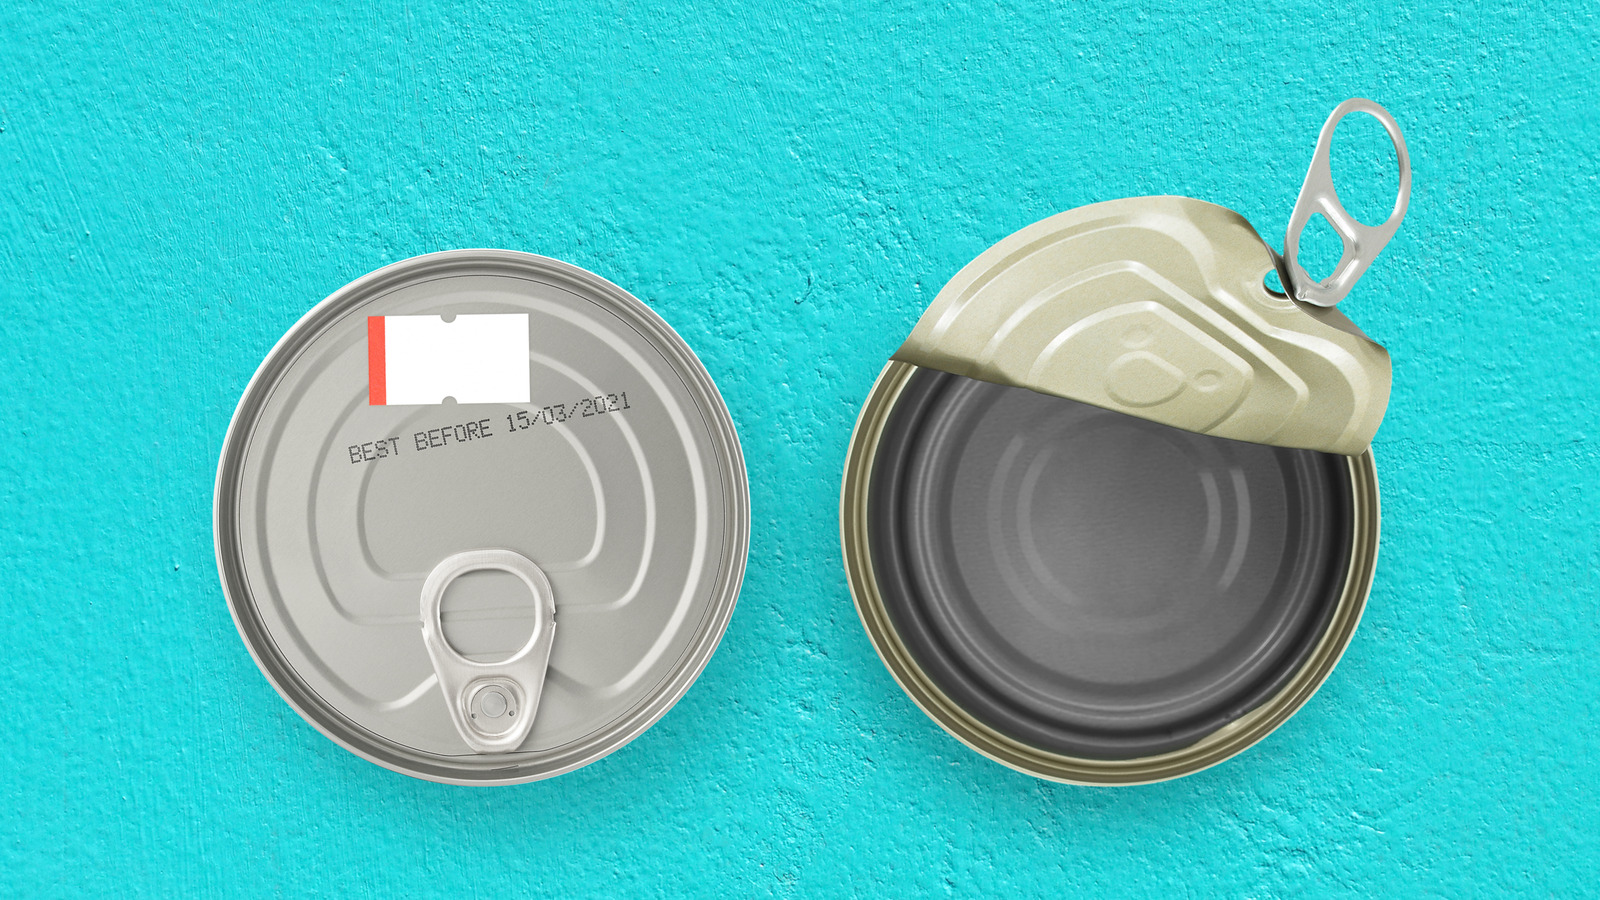 https://www.tastingtable.com/img/gallery/the-easiest-ways-to-open-cans-without-a-can-opener/l-intro-1653330221.jpg